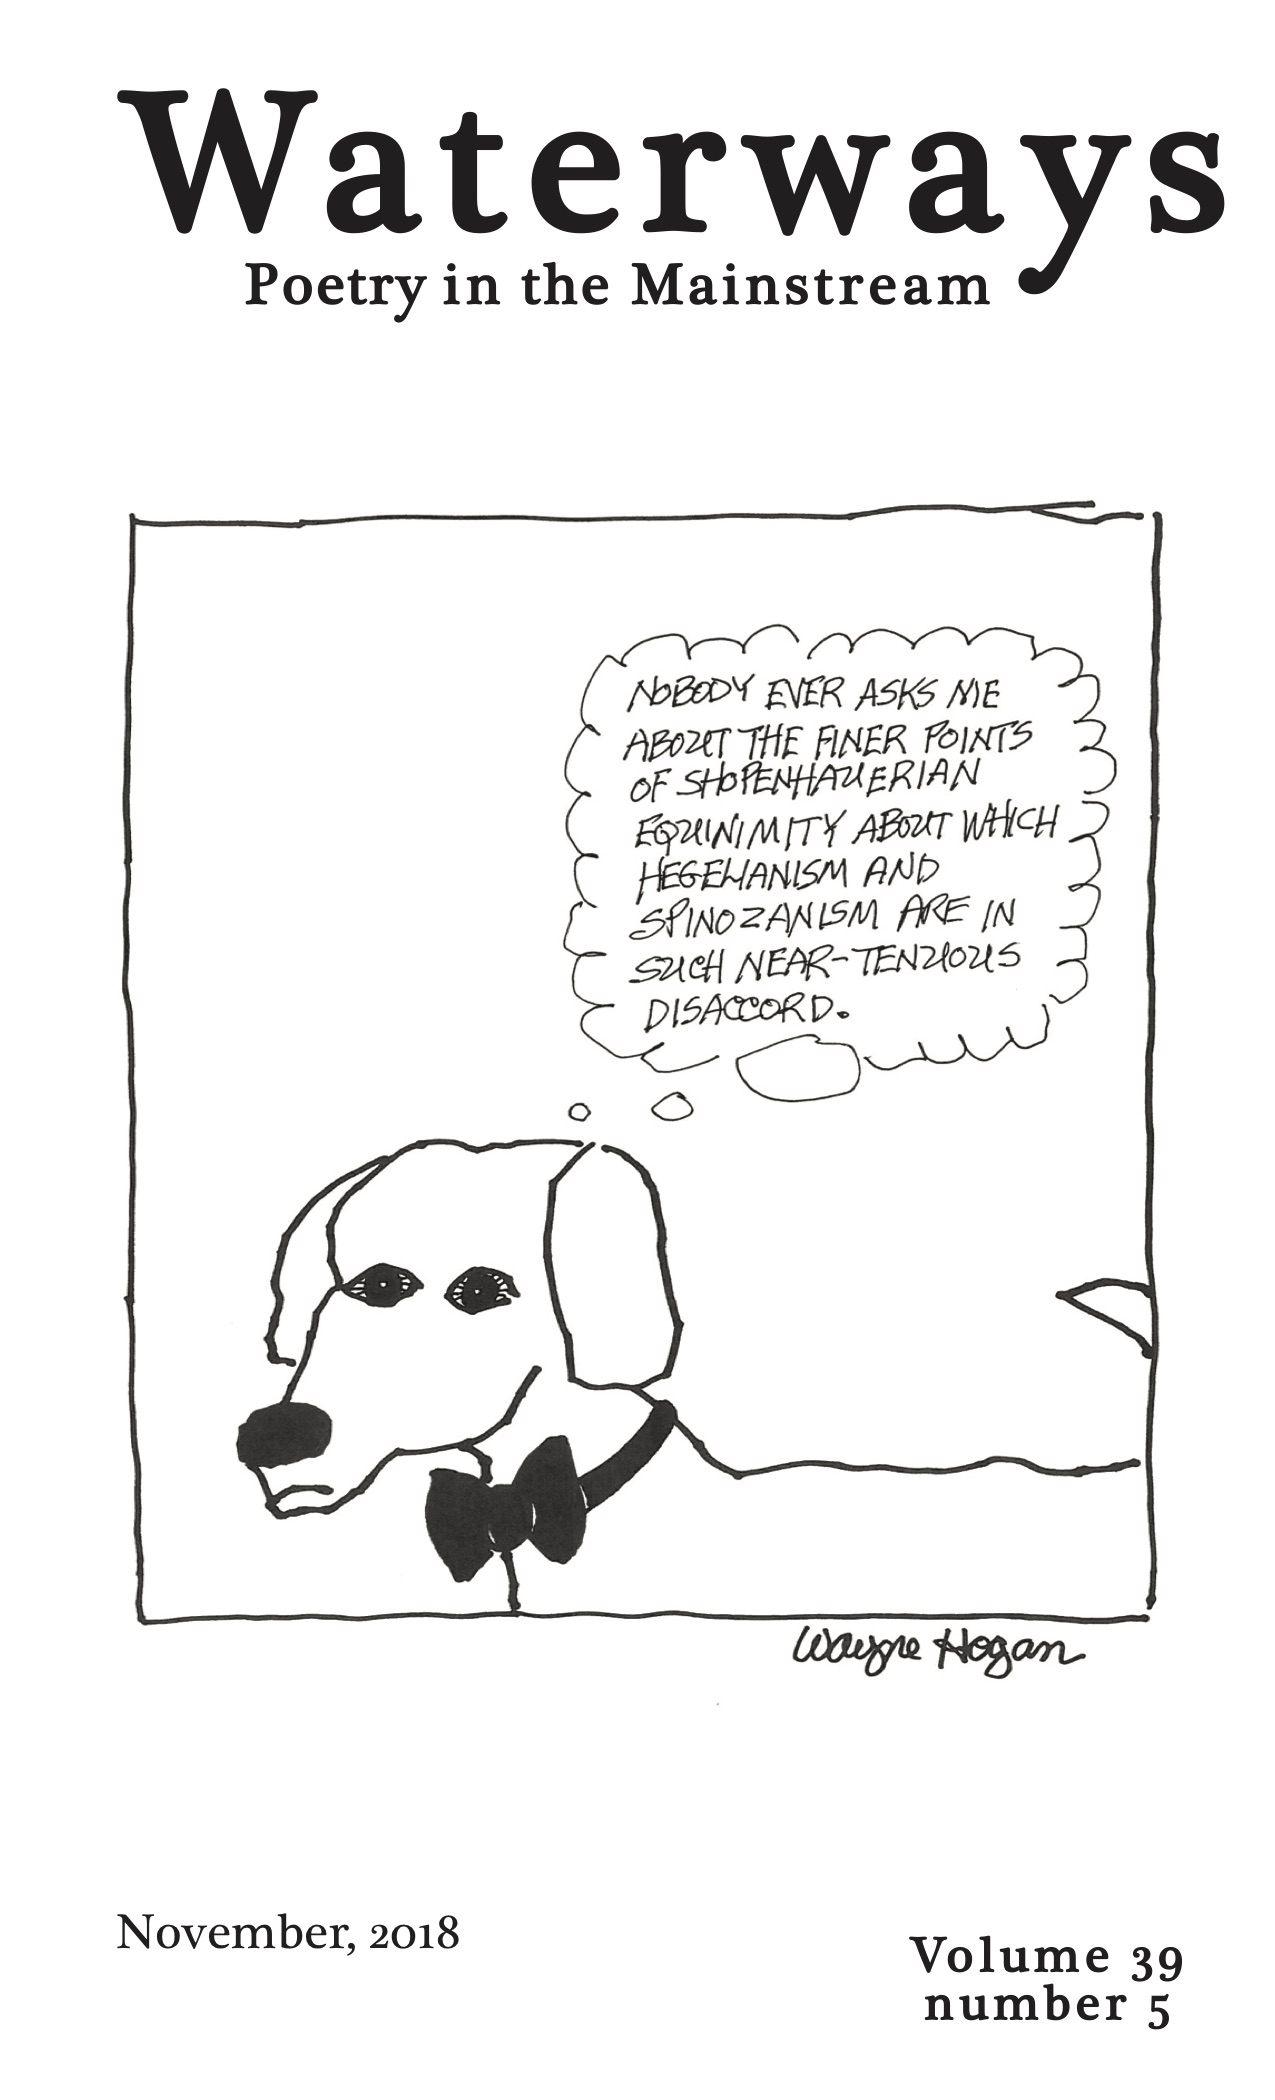 Wayne Hogan's drawing of a dog wearing a bow tie.  The dog's dialogue bubble indicates the dog is saying, "Nobody ever asks me about the finer points of shopenhauerian equinimity about which helegianism and spinozanism are in such near-tenuous disaccord."